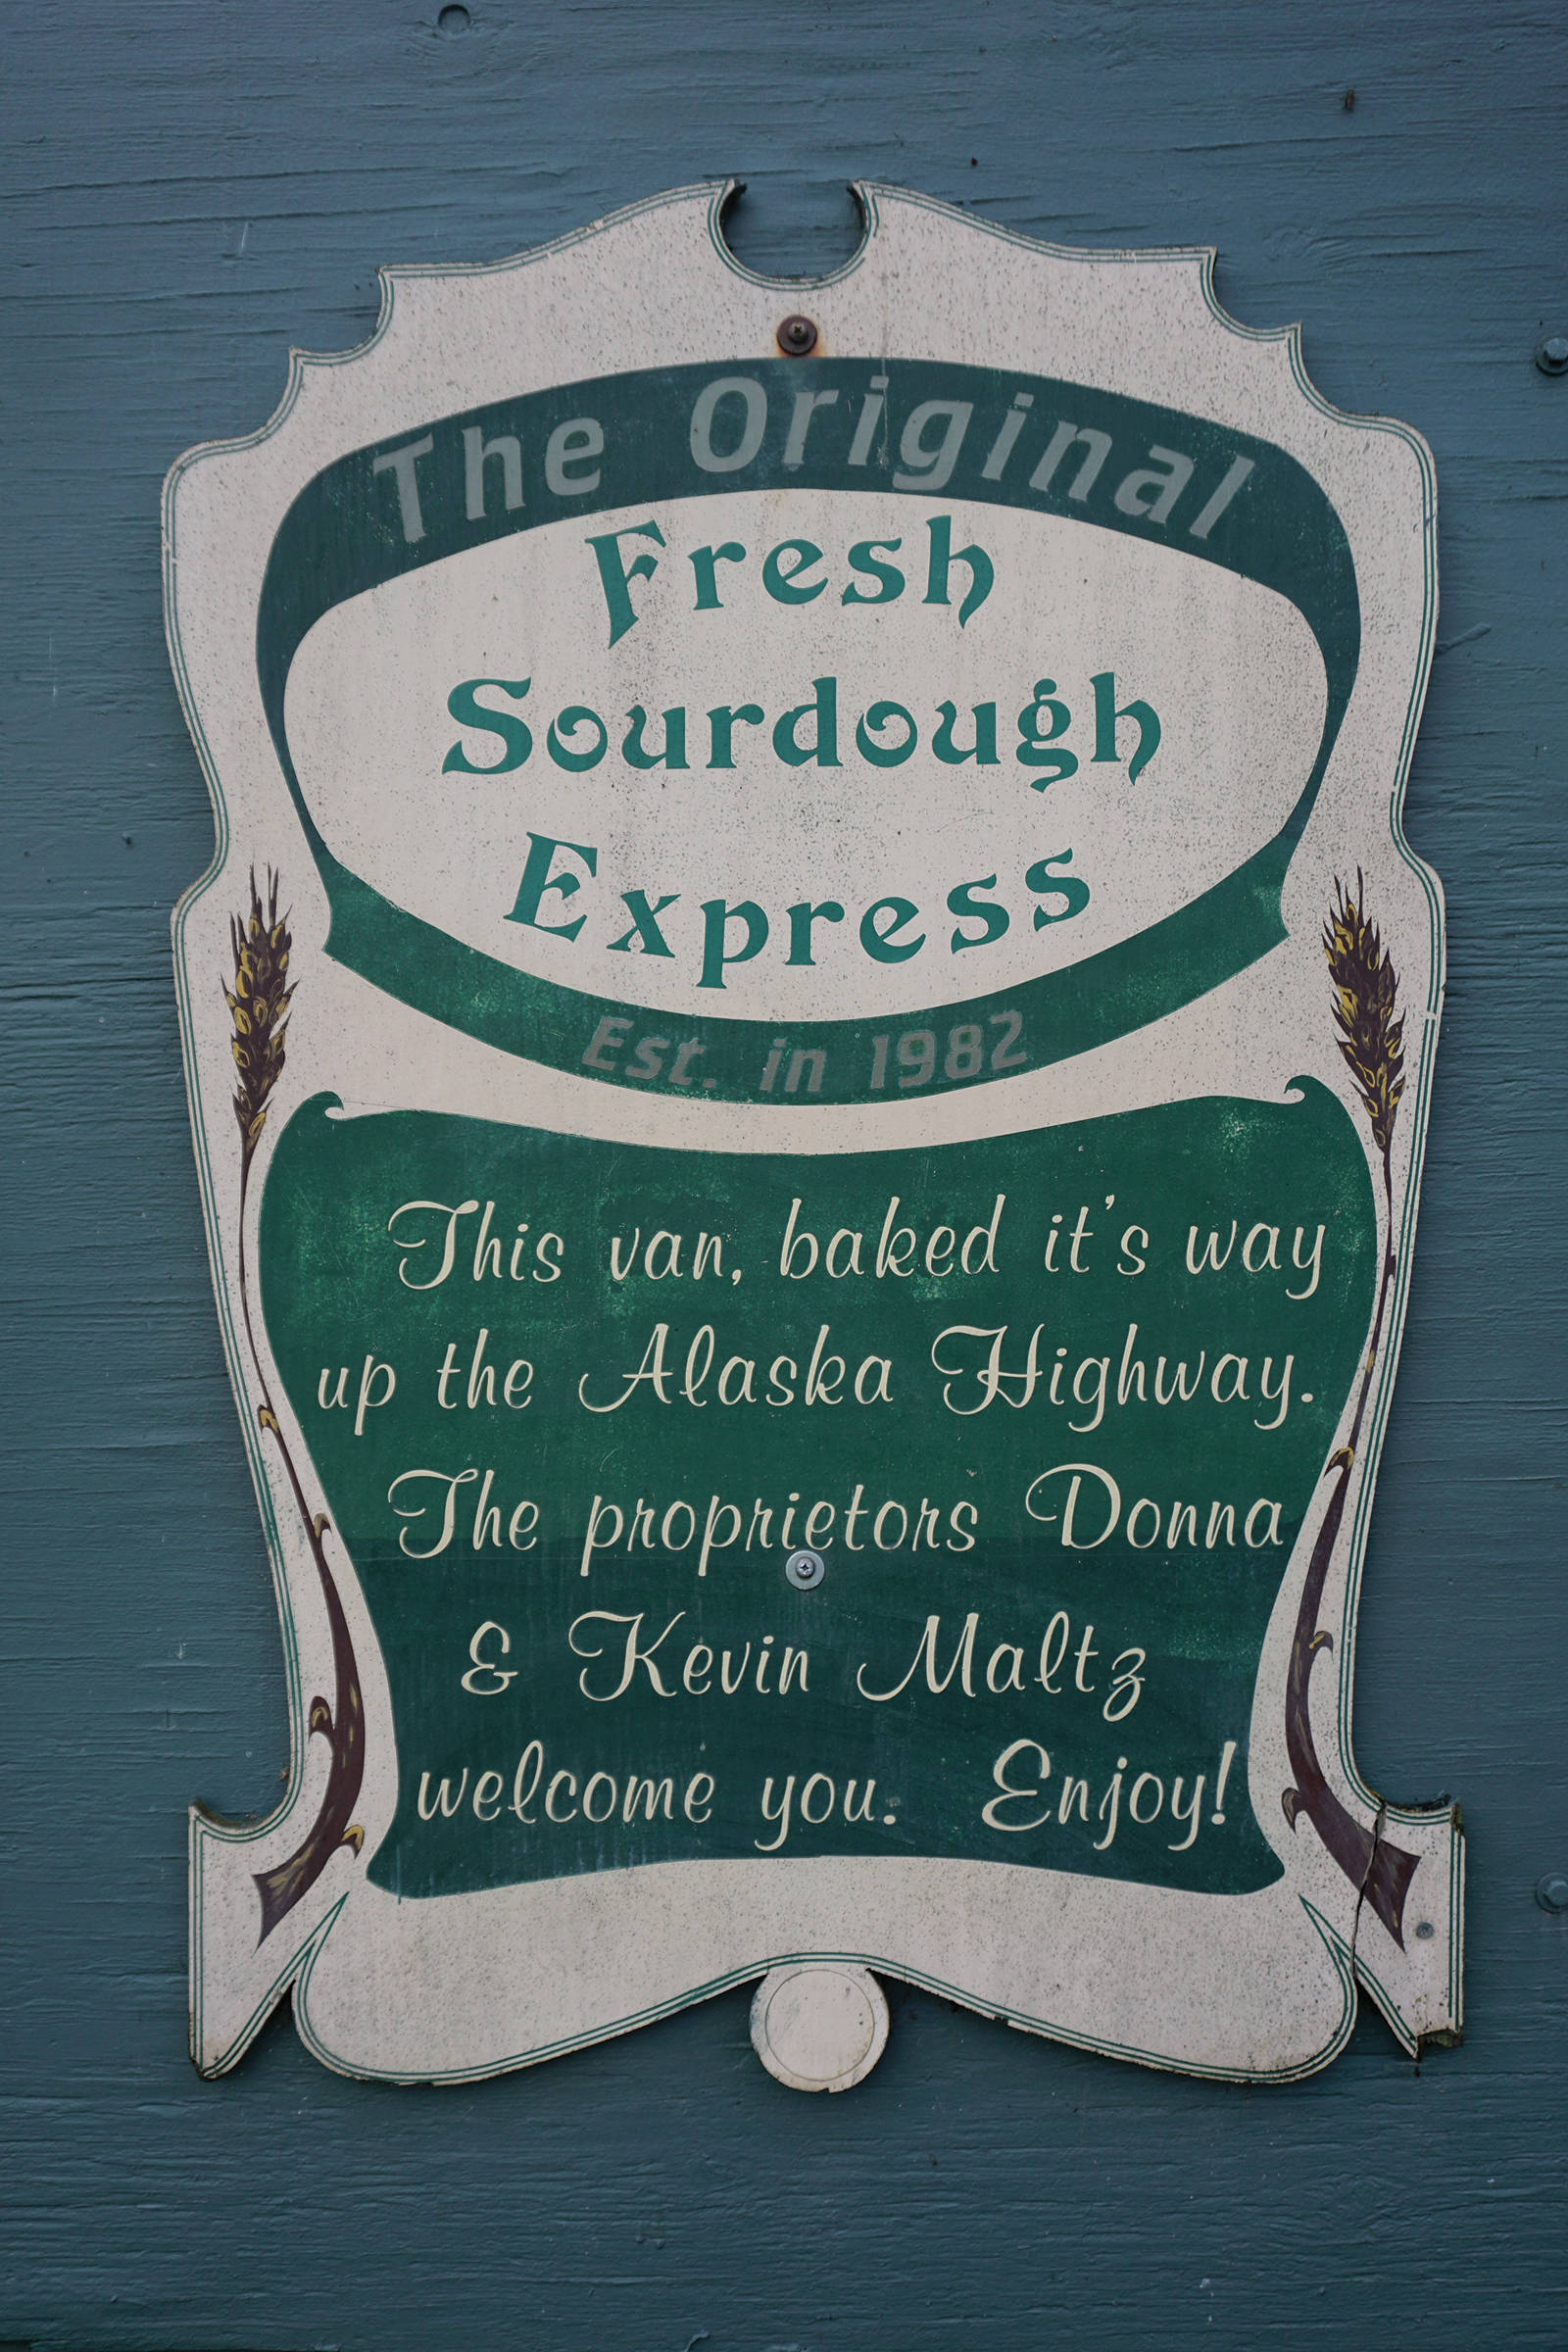 A sign on the original Fresh Sourdough Express Bakery and Cafe van as seen on Sept. 18, 2019, at its Ocean Drive location in Homer, Alaska. (Photo by Michael Armstrong/Homer News)